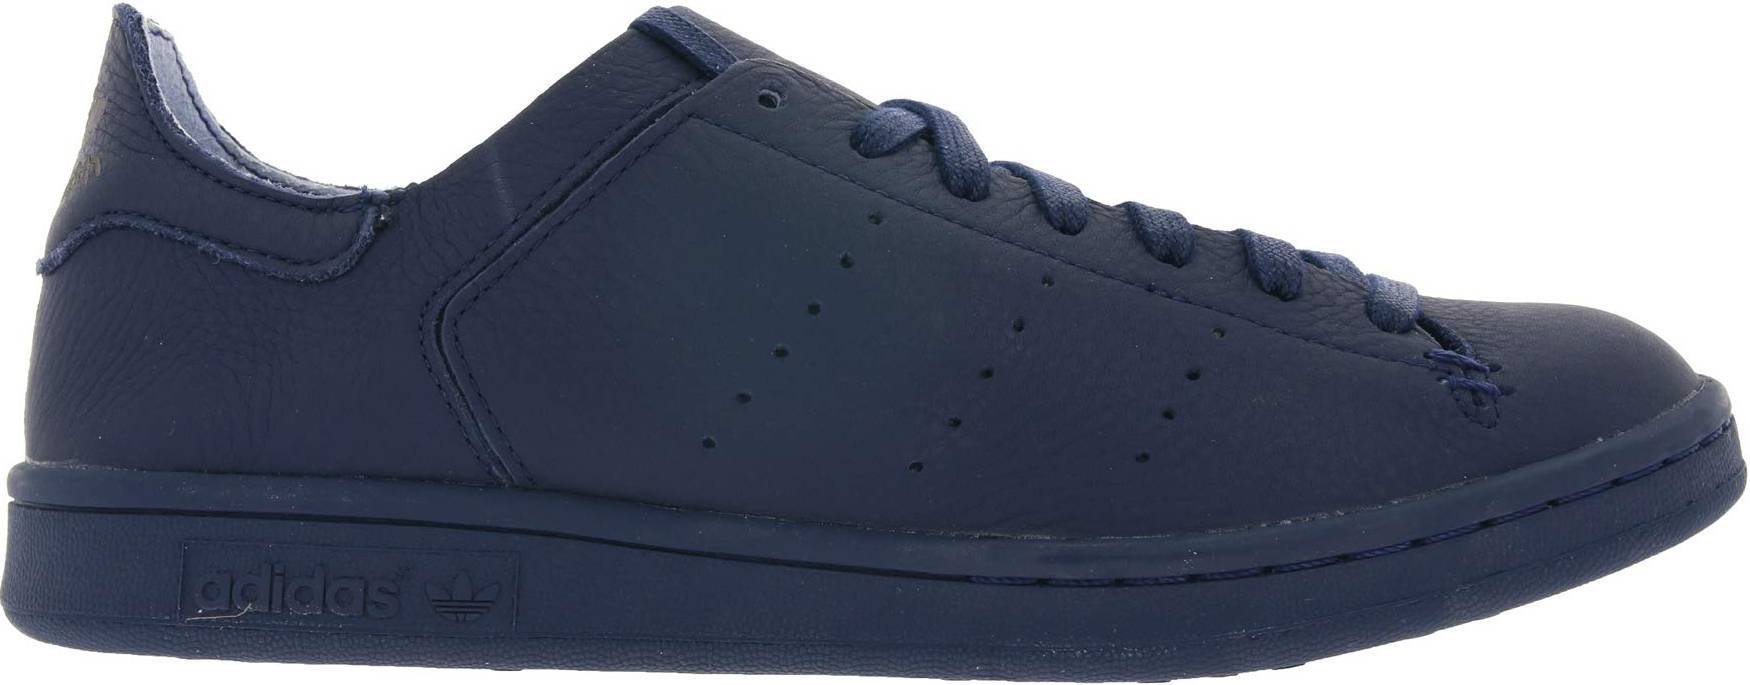 Adidas Stan Smith Leather Sock sneakers in grey + white (only $118 ... افضل عطر رجالي